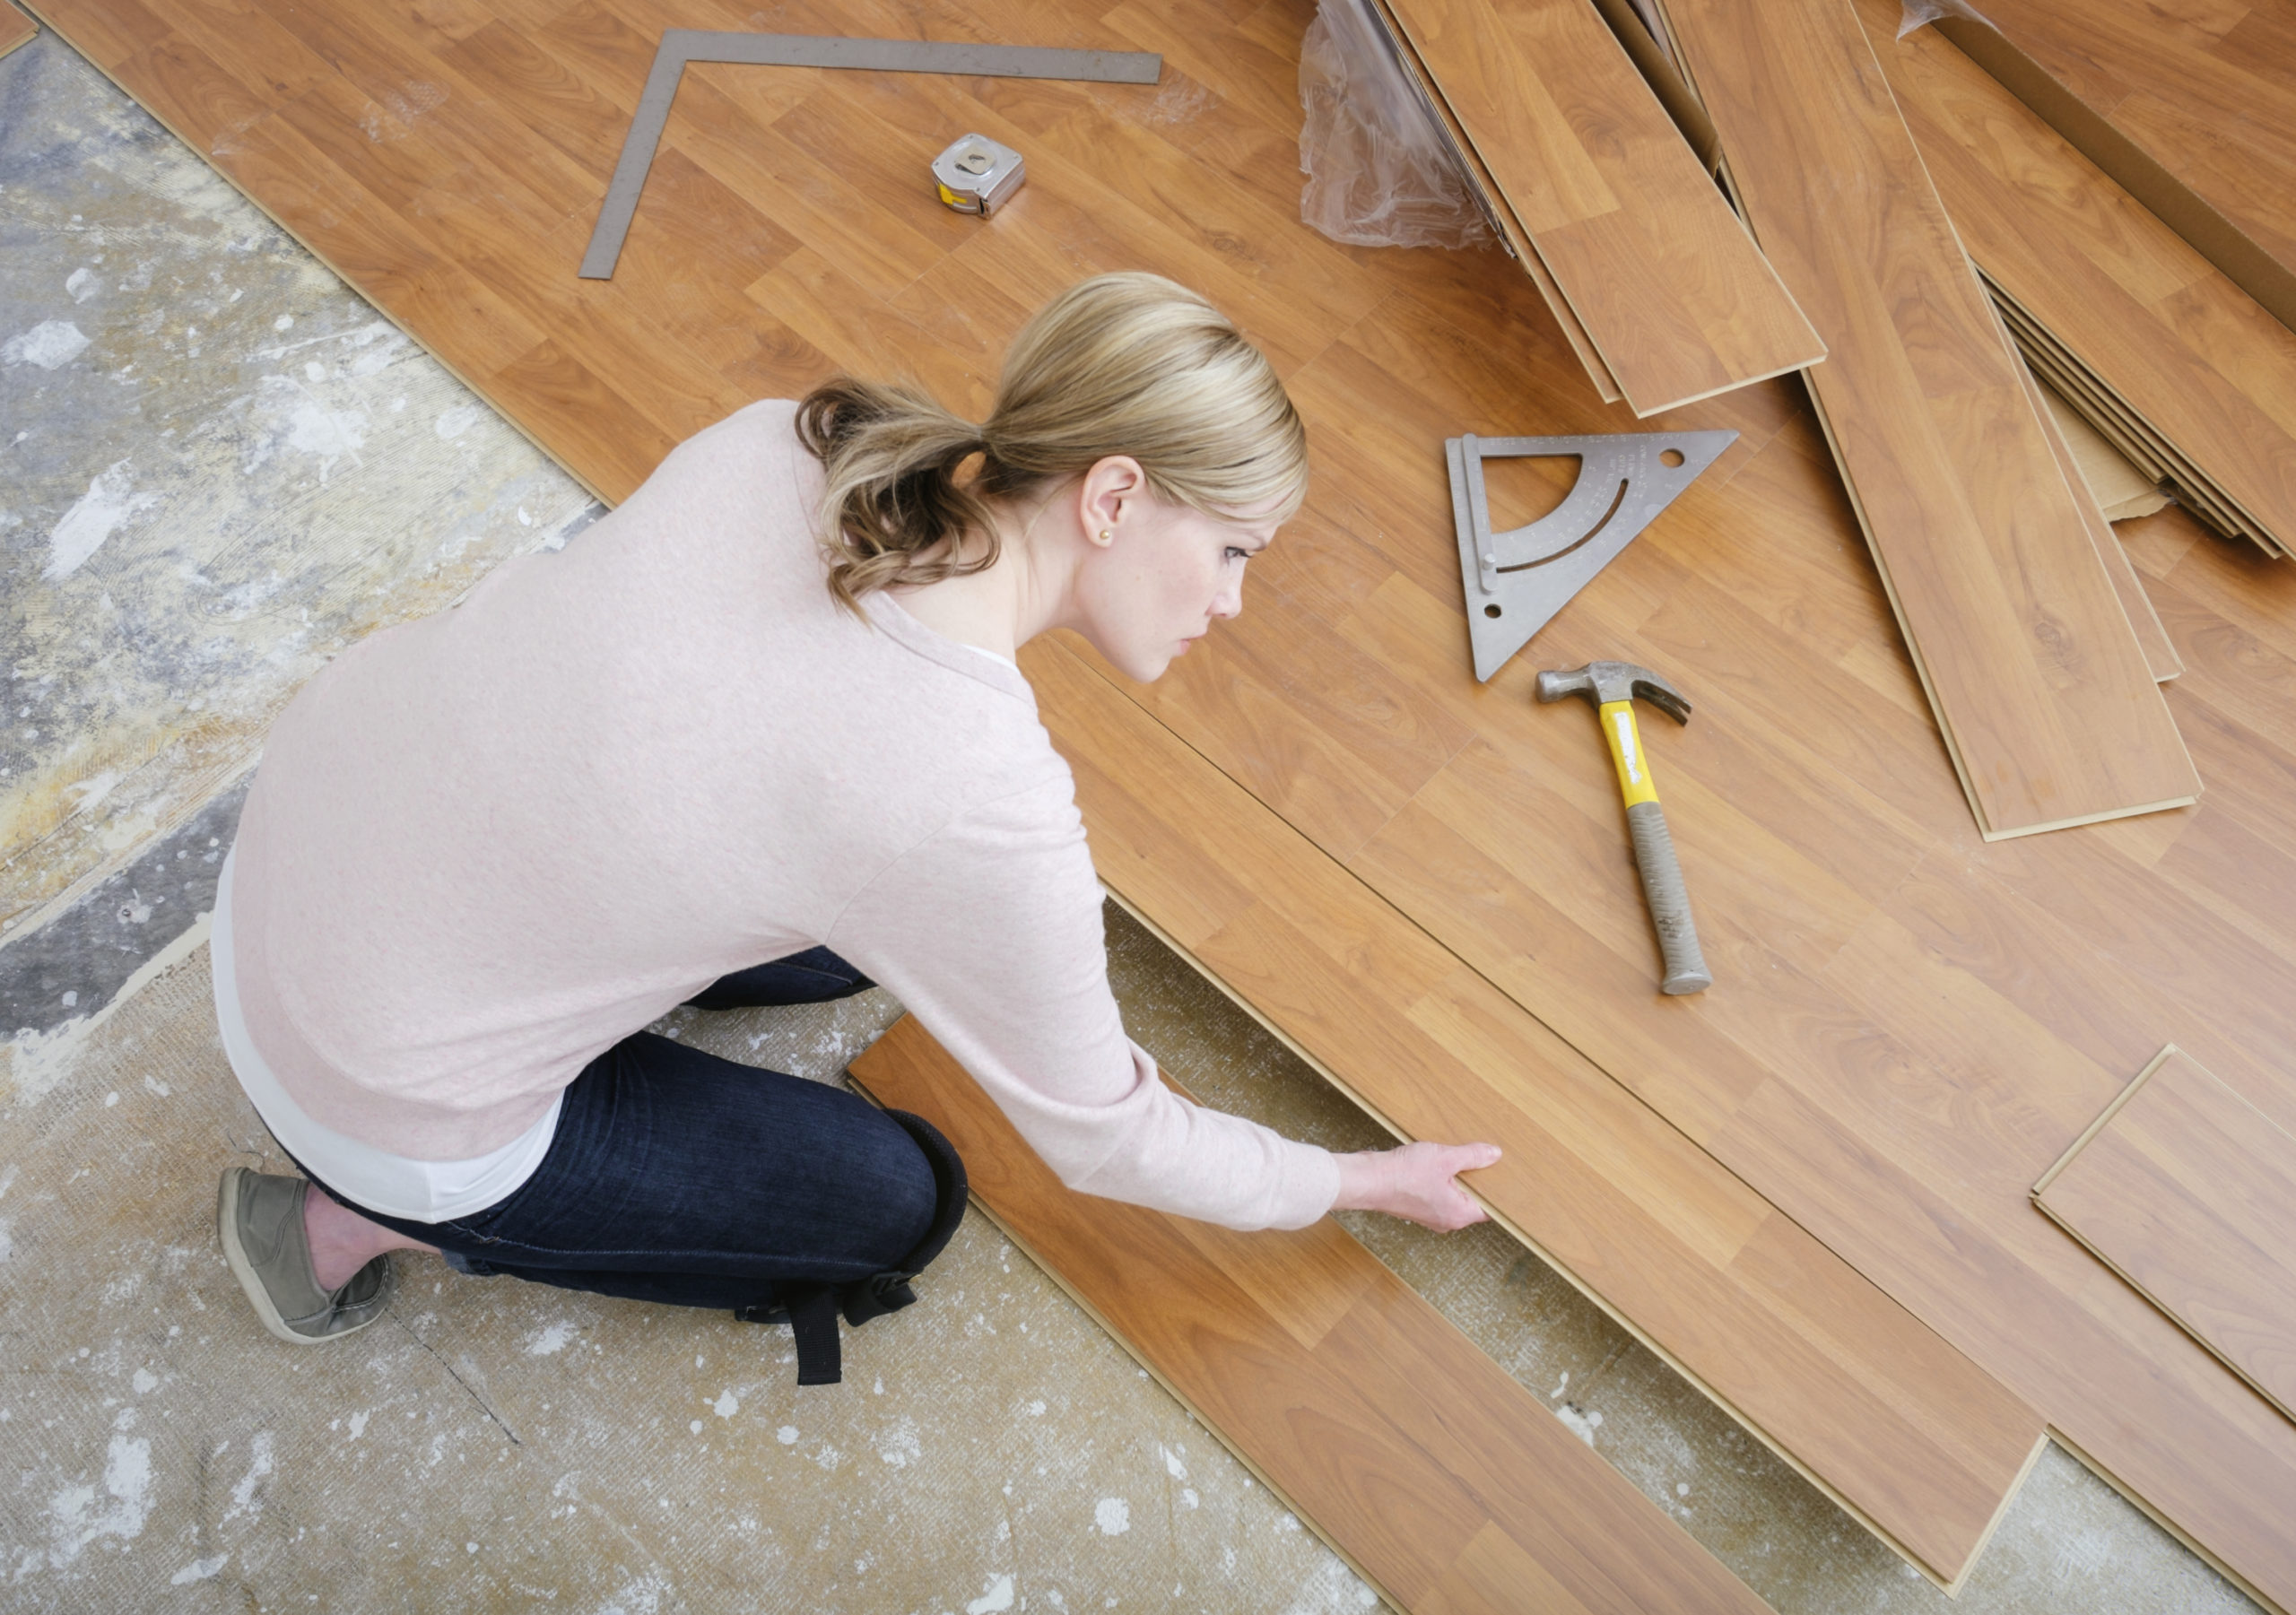 Easiest 5 DIY Flooring Solutions: Learn to Install Flooring On Your Own -  Flooring Inc